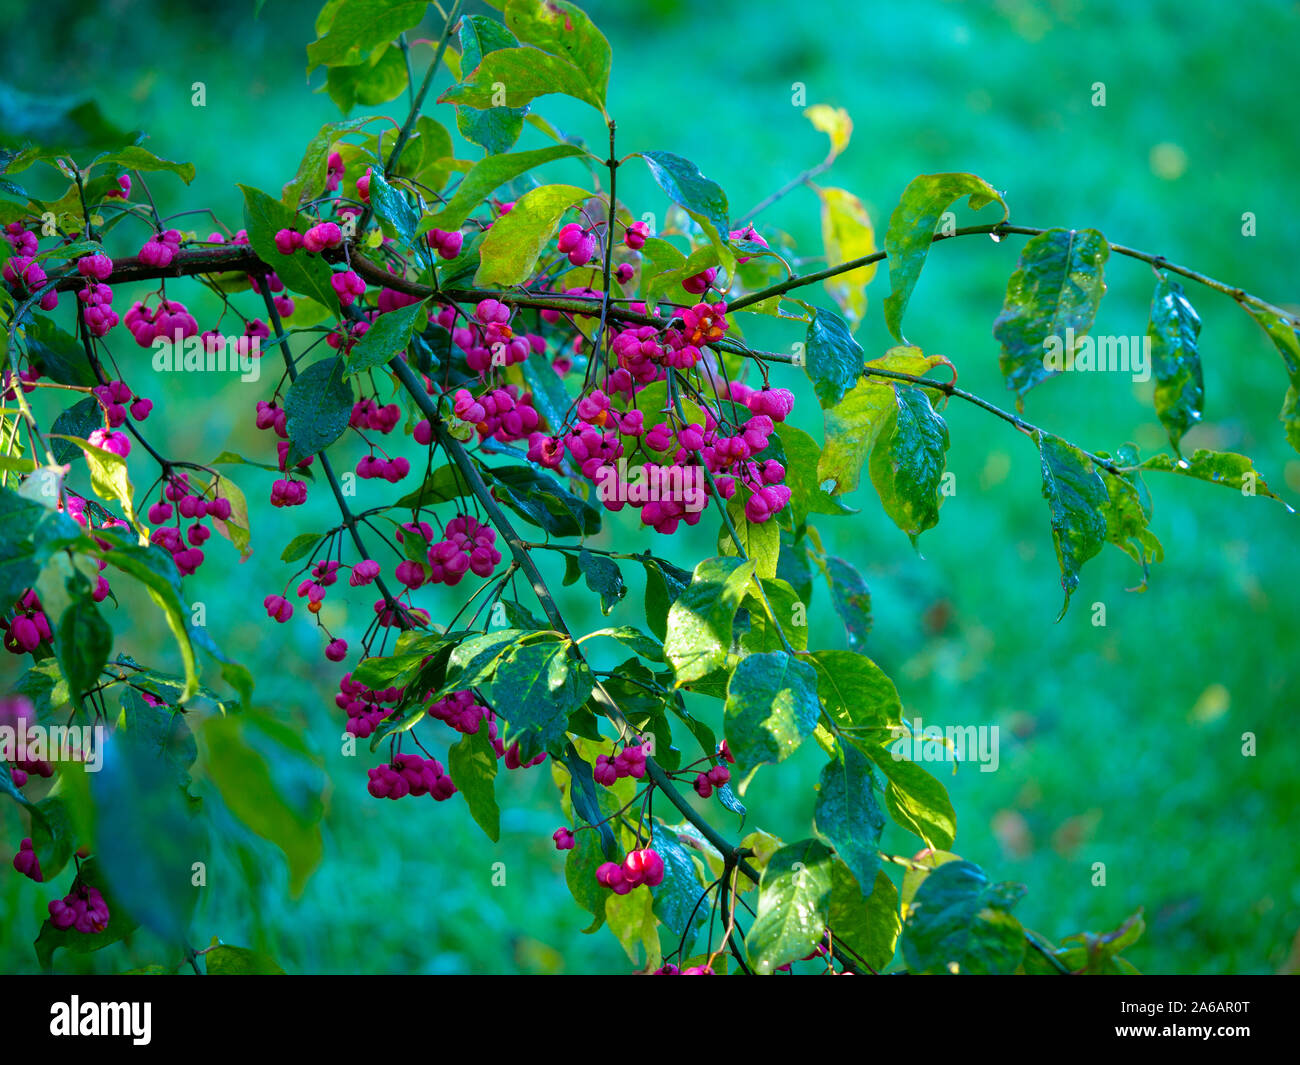 Branch of a spindle tree (Euonymus europaea) with beautiful pink berries and green leaves catching autumn sunlight Stock Photo